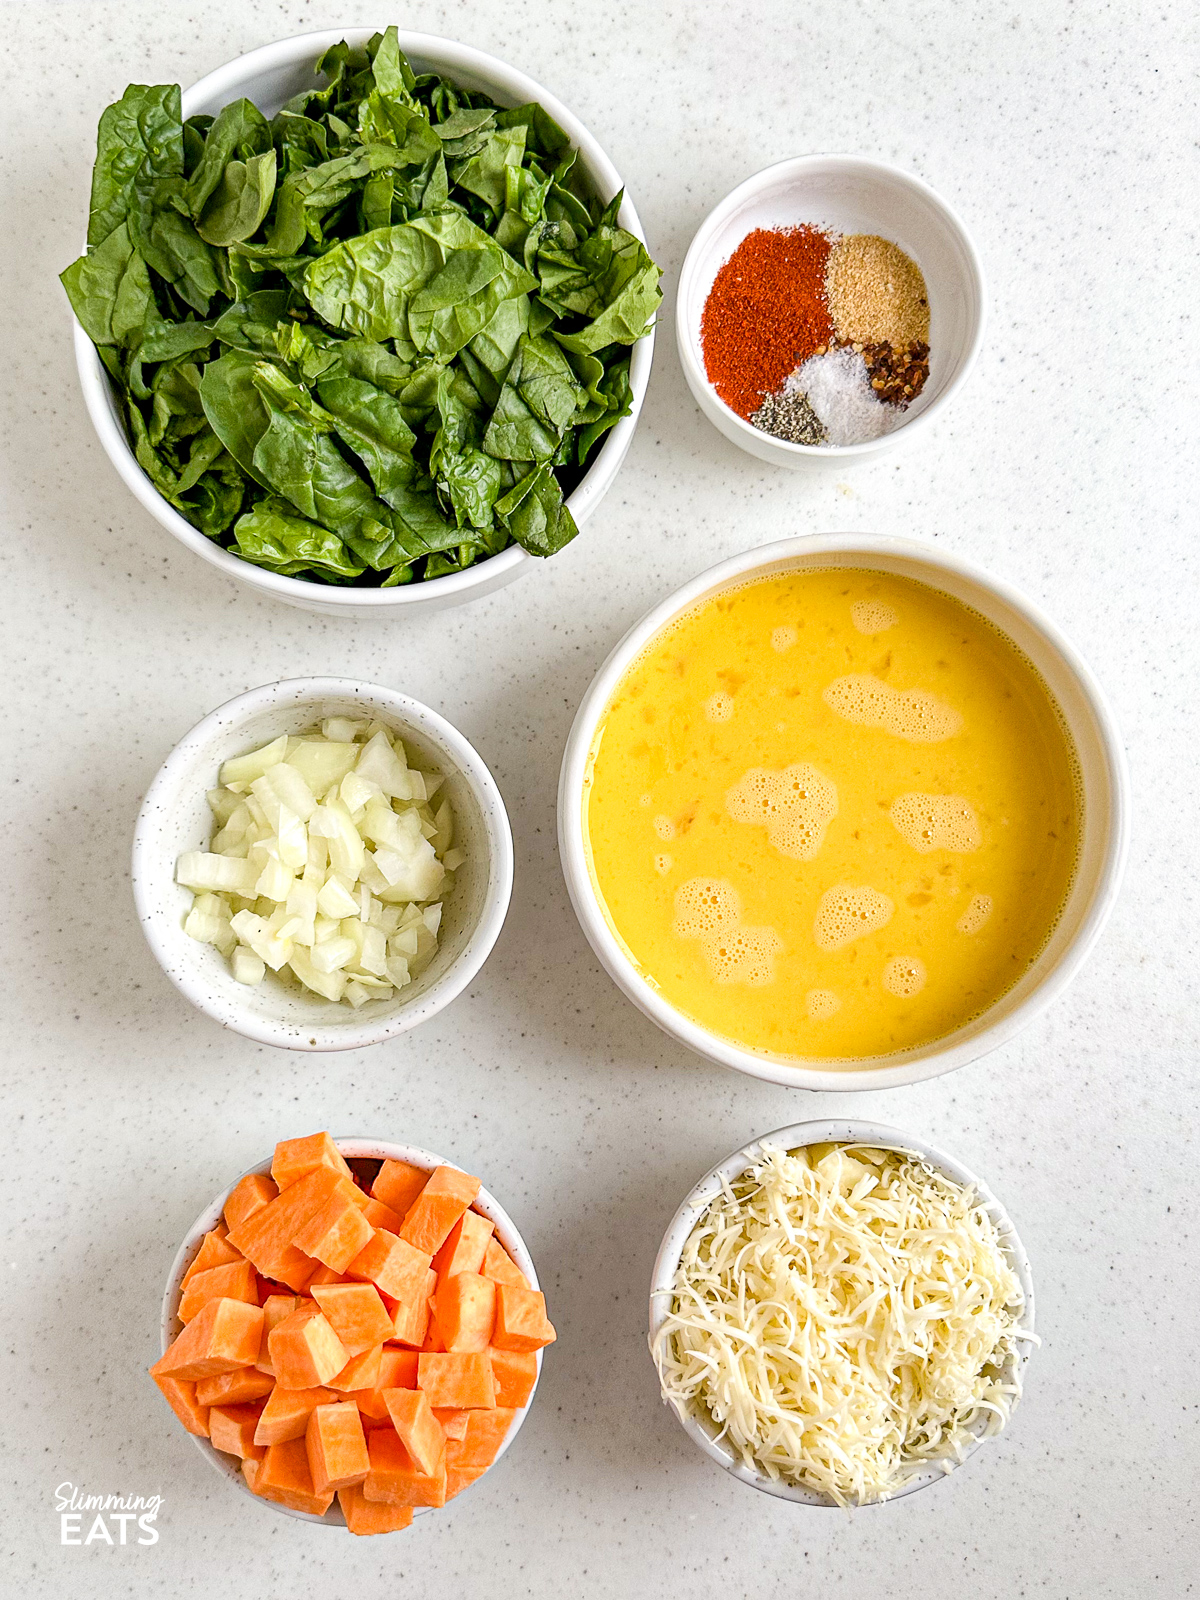 ingredients in bowls to make Sweet Potato and Spinach Frittata - spinach, seasoning, onion, beaten eggs, cubed sweet potato and greated cheddar